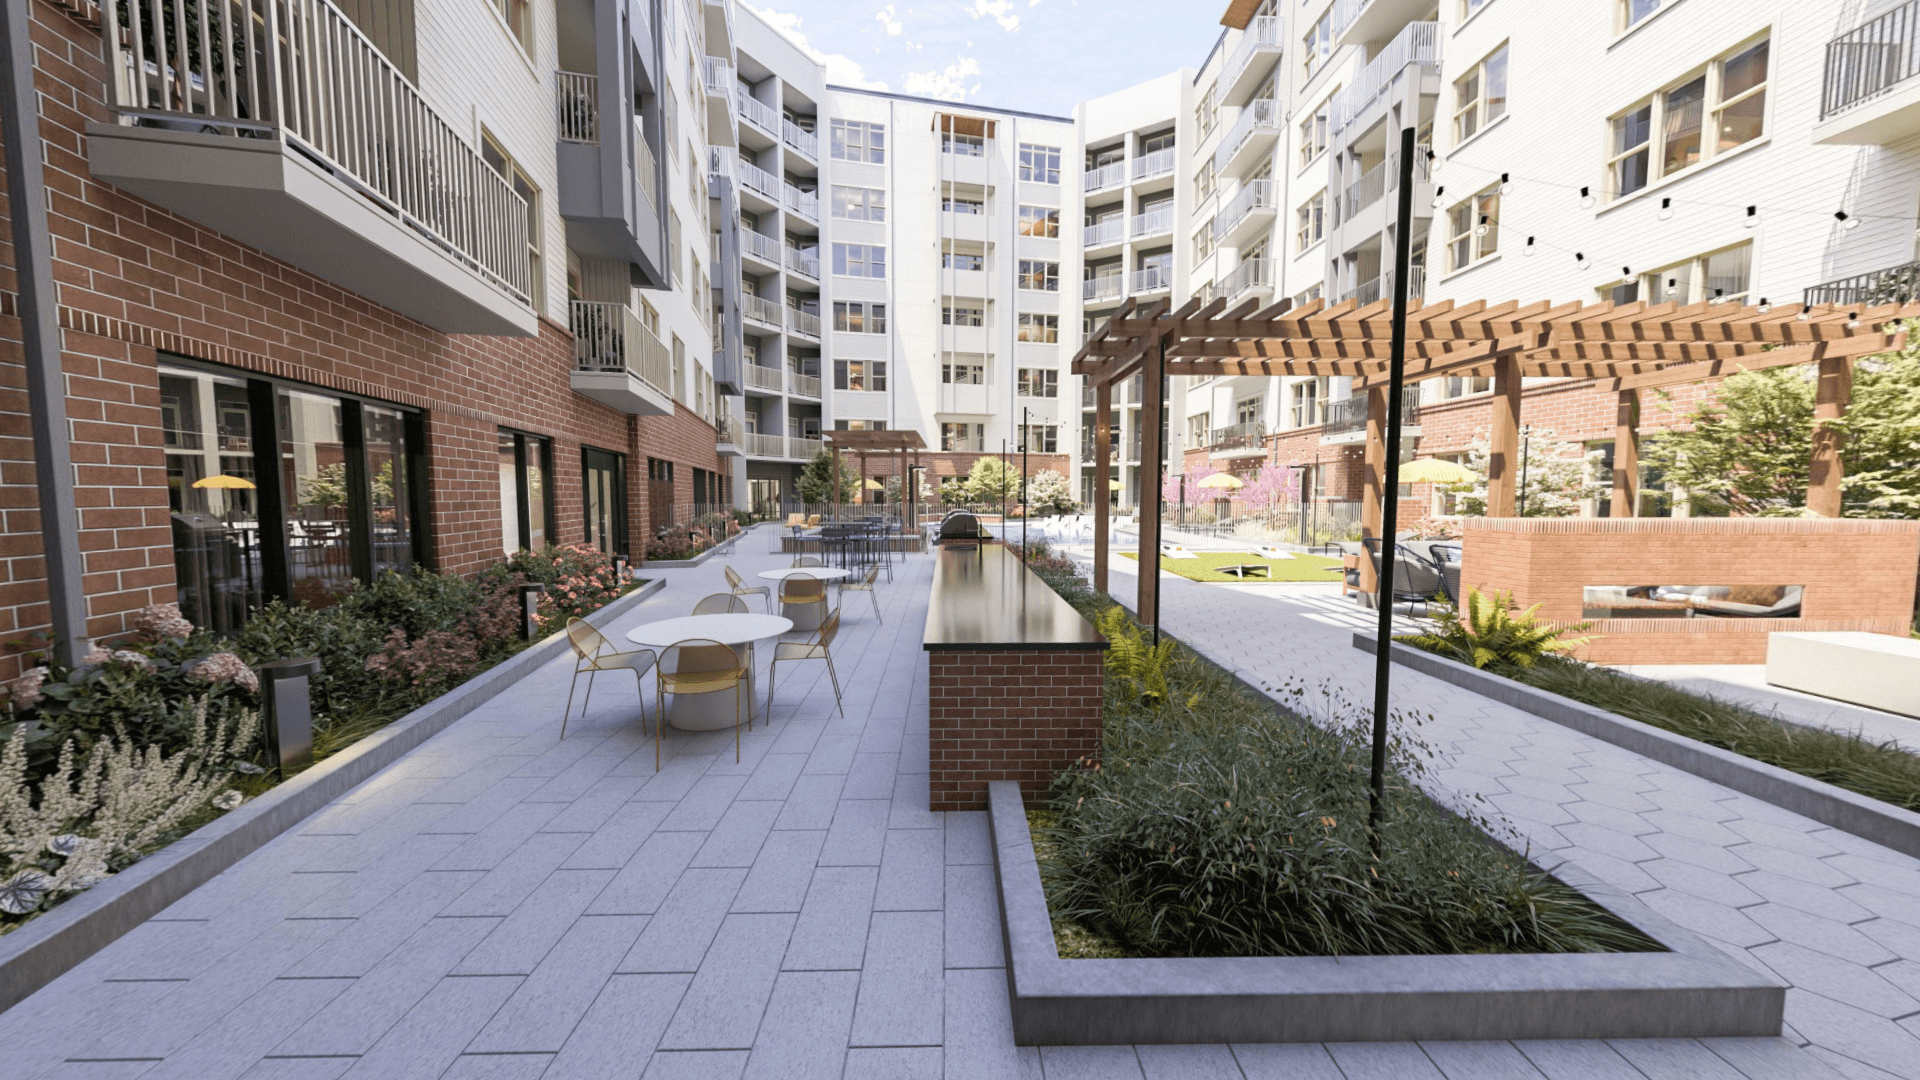 a rendering of a courtyard with tables and chairs in an apartment building